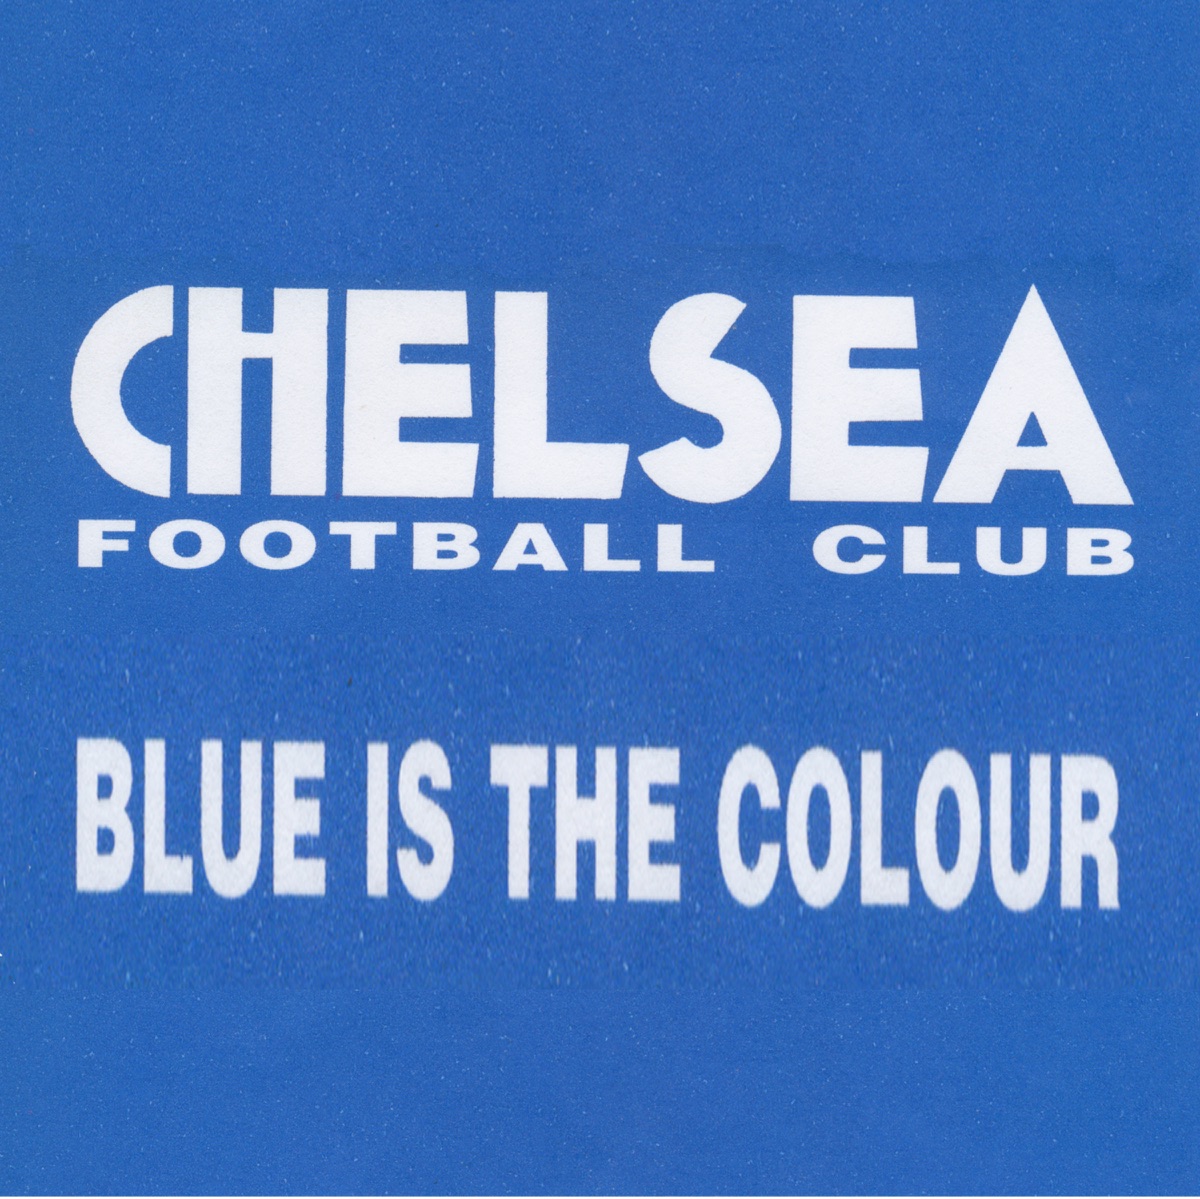 Blue Is The Colour (Original) by Chelsea Football Club on Apple Music